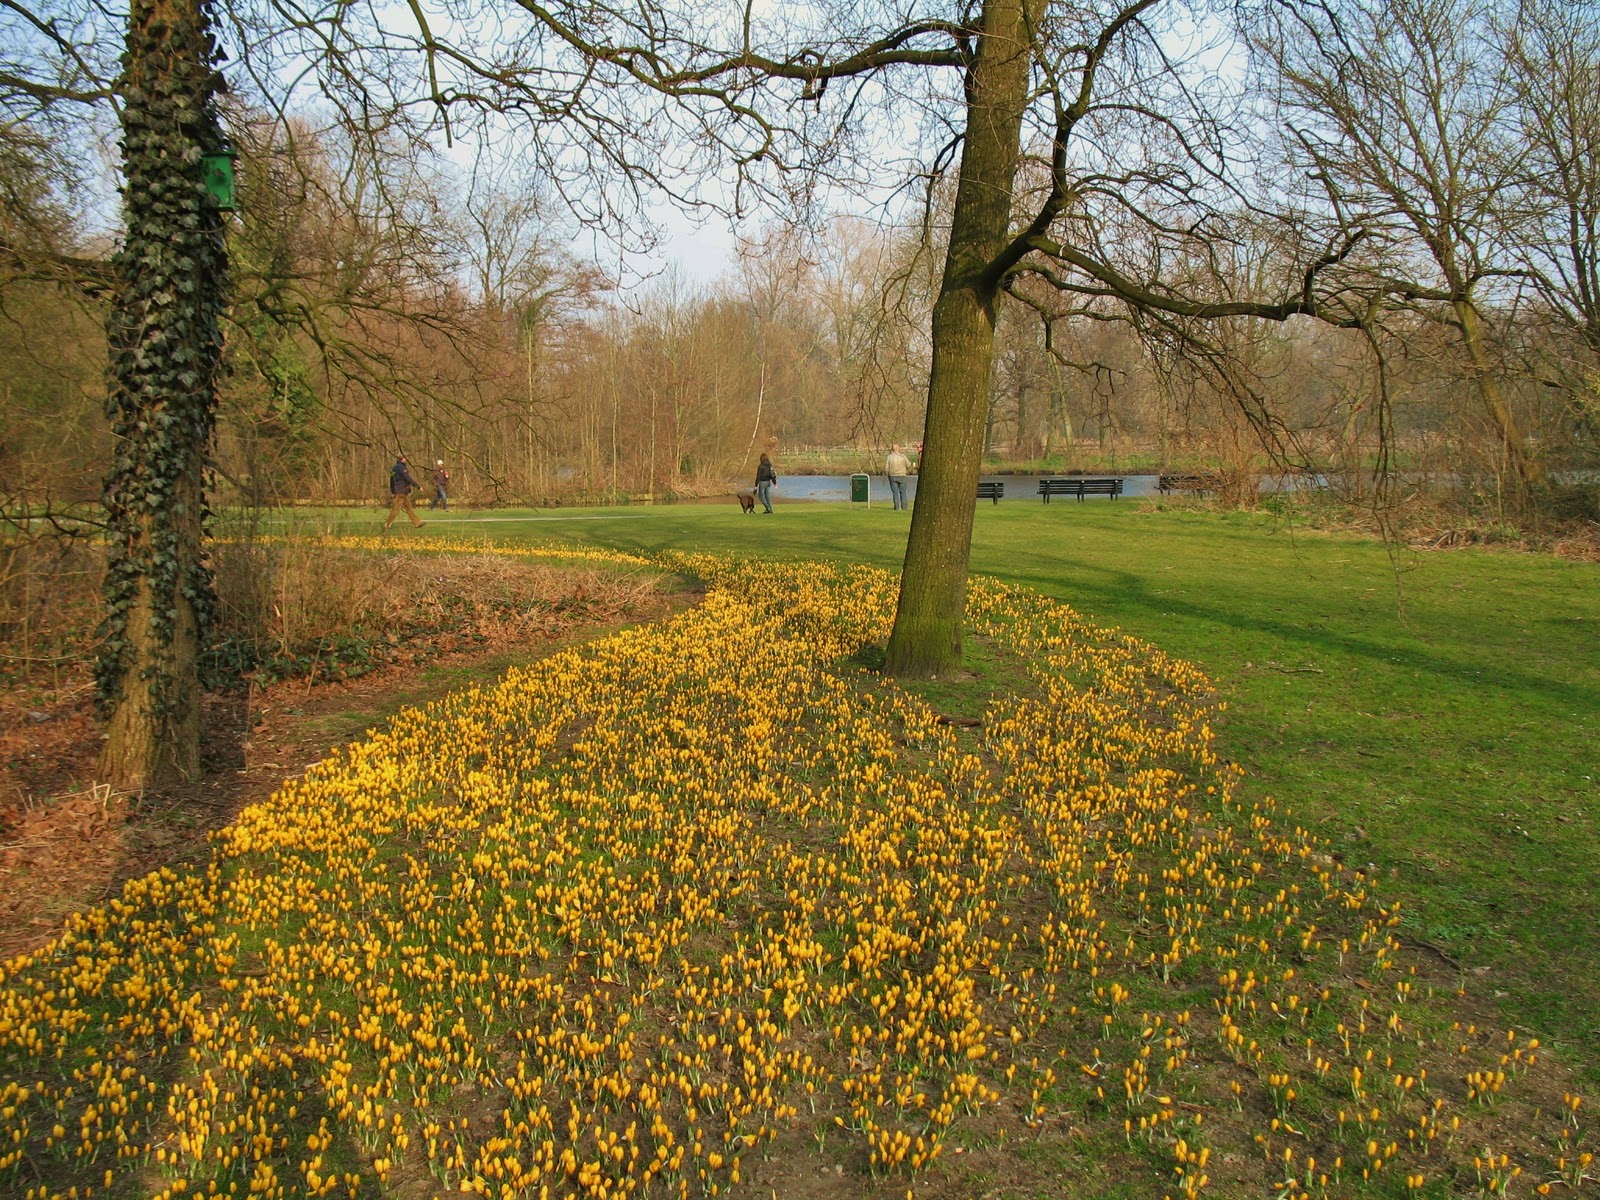 Notes from the Netherlands: Back in Amsterdam-- And it's spring!